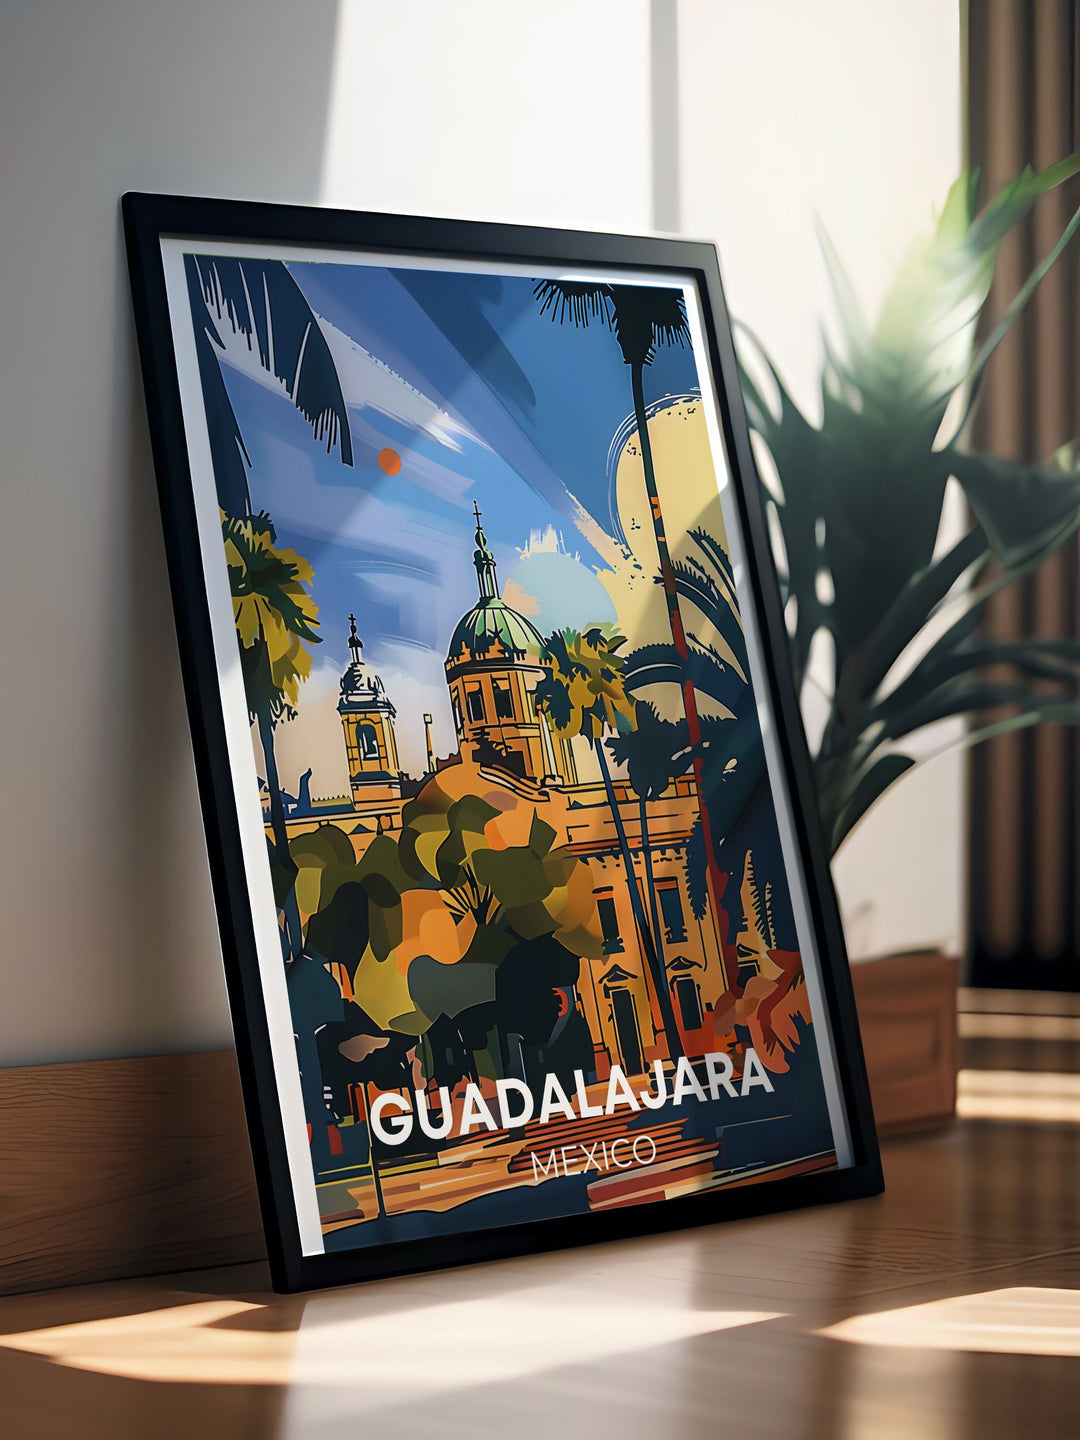 Showcasing the lively streets of Guadalajara, this travel poster captures the essence of the citys vibrant culture and colorful art, bringing a piece of Mexicos Pearl of the West into your home.